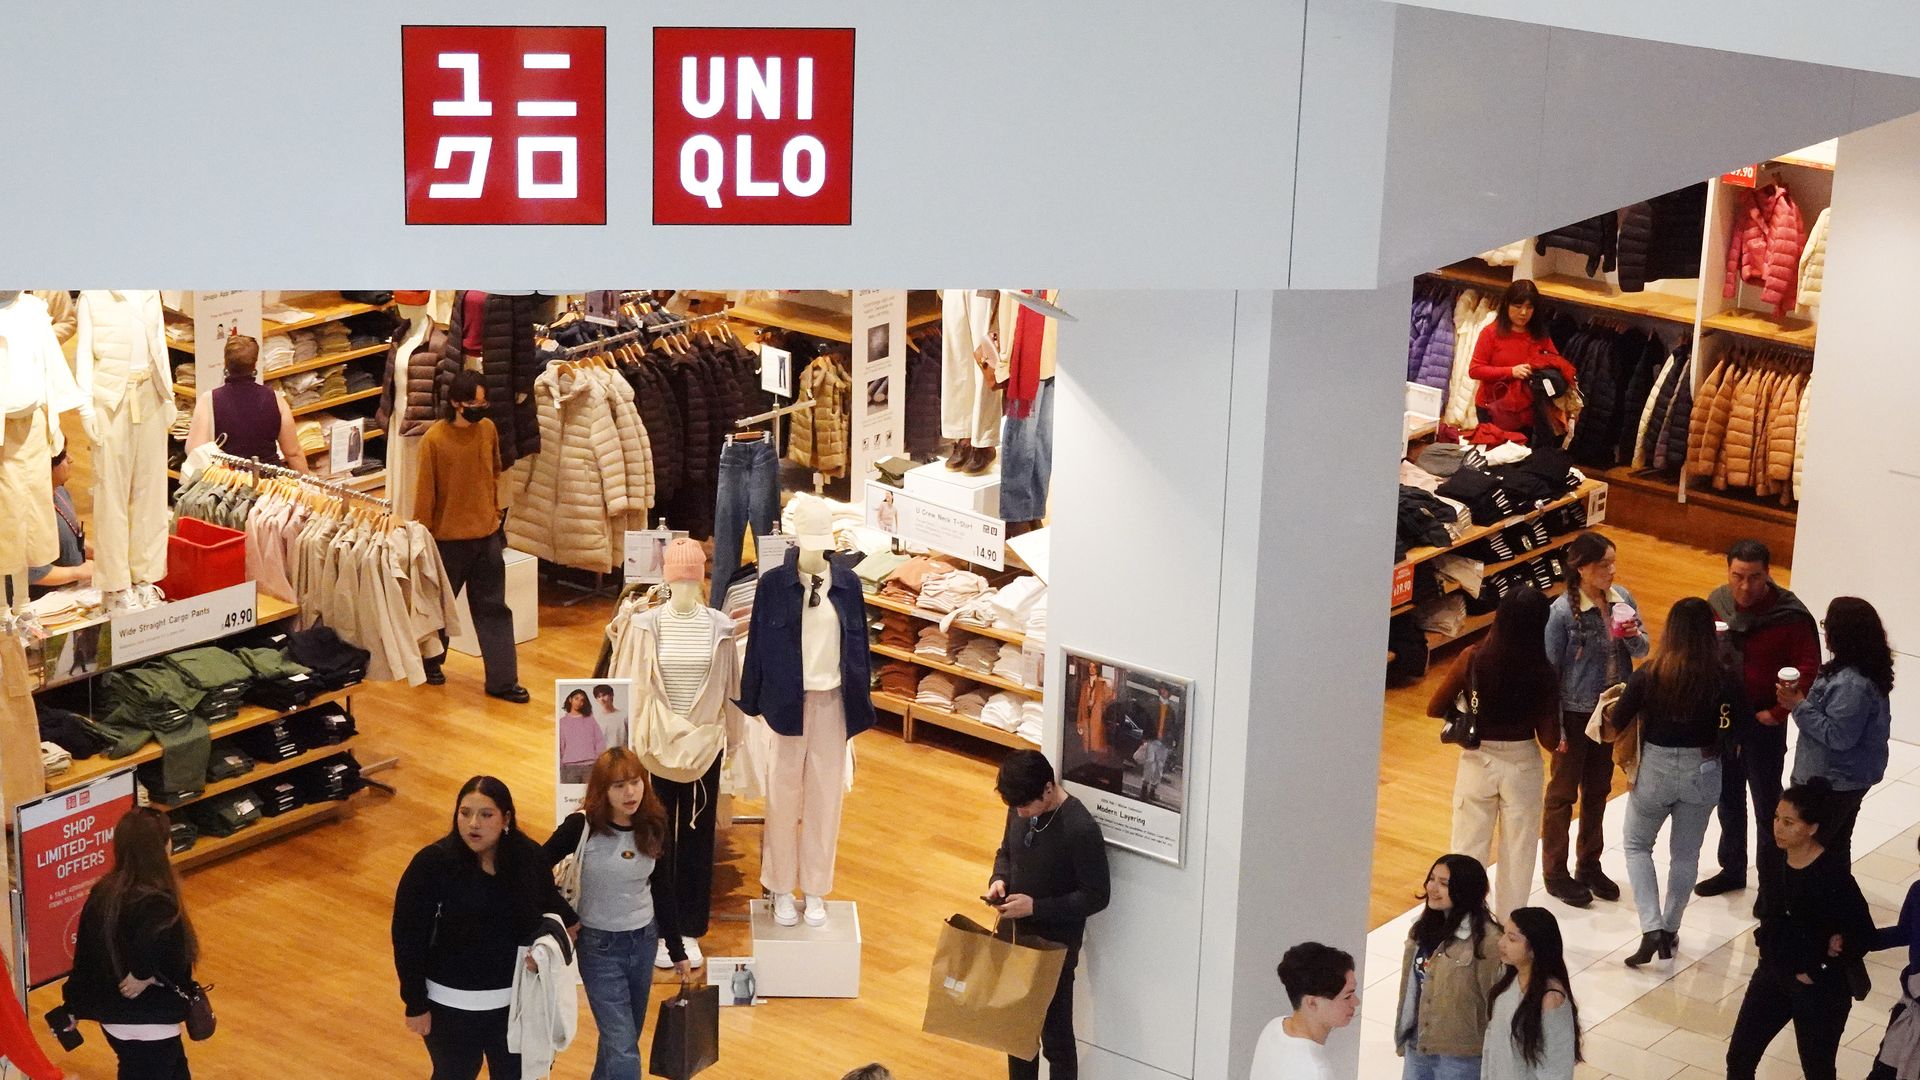 Uniqlo is coming to a Houston mall - Axios Houston